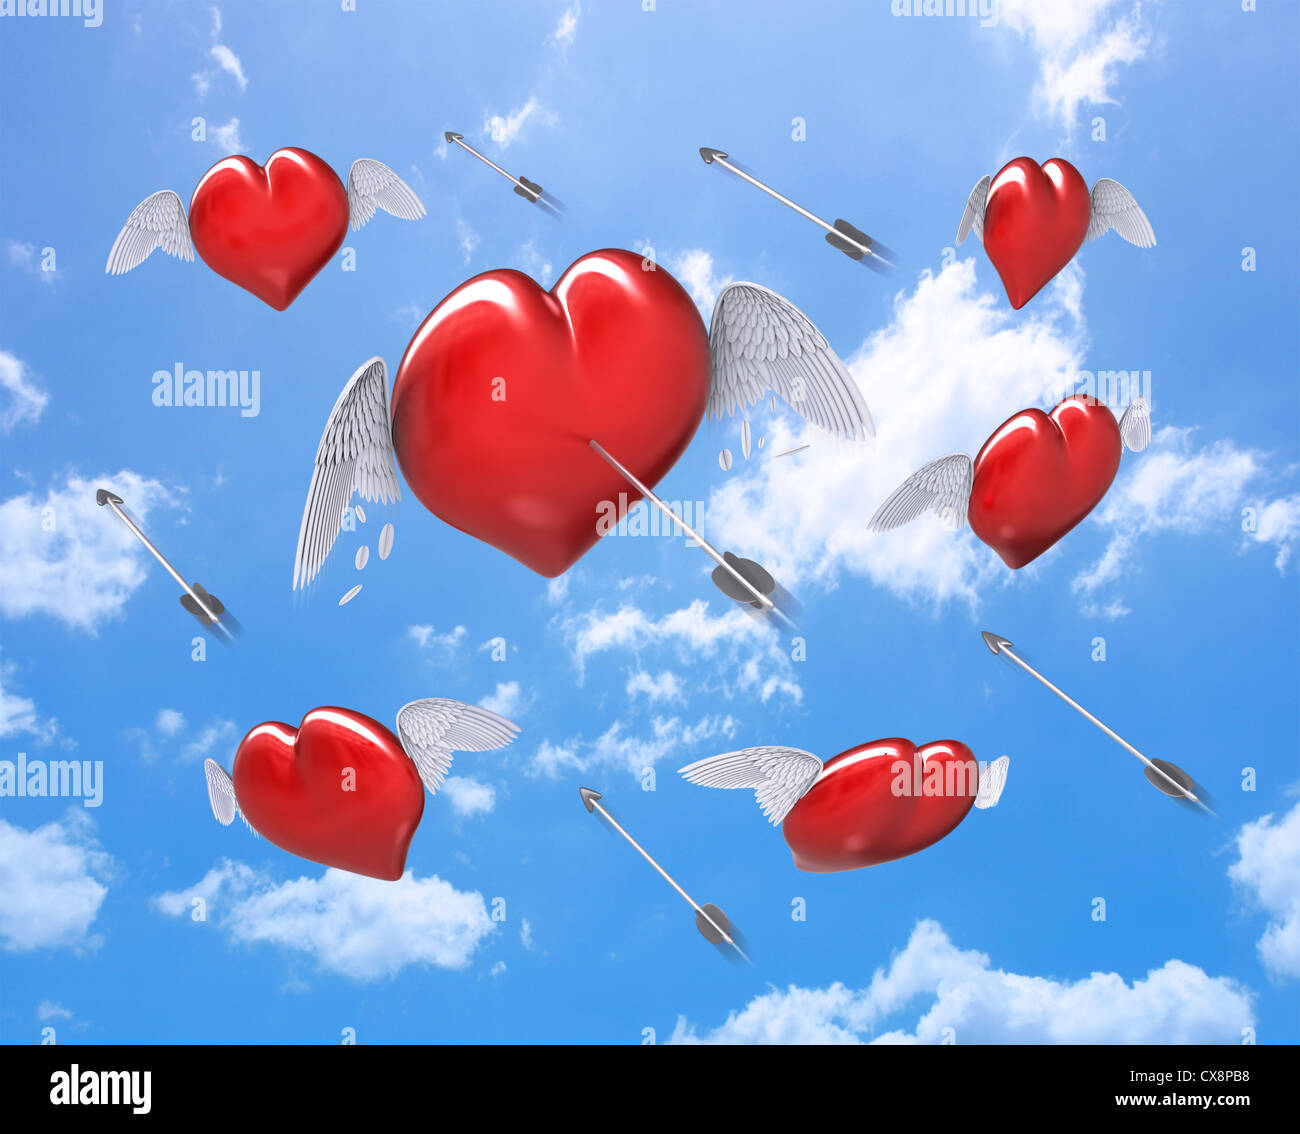 Heart with wings. Concept of cupid. Stock Photo